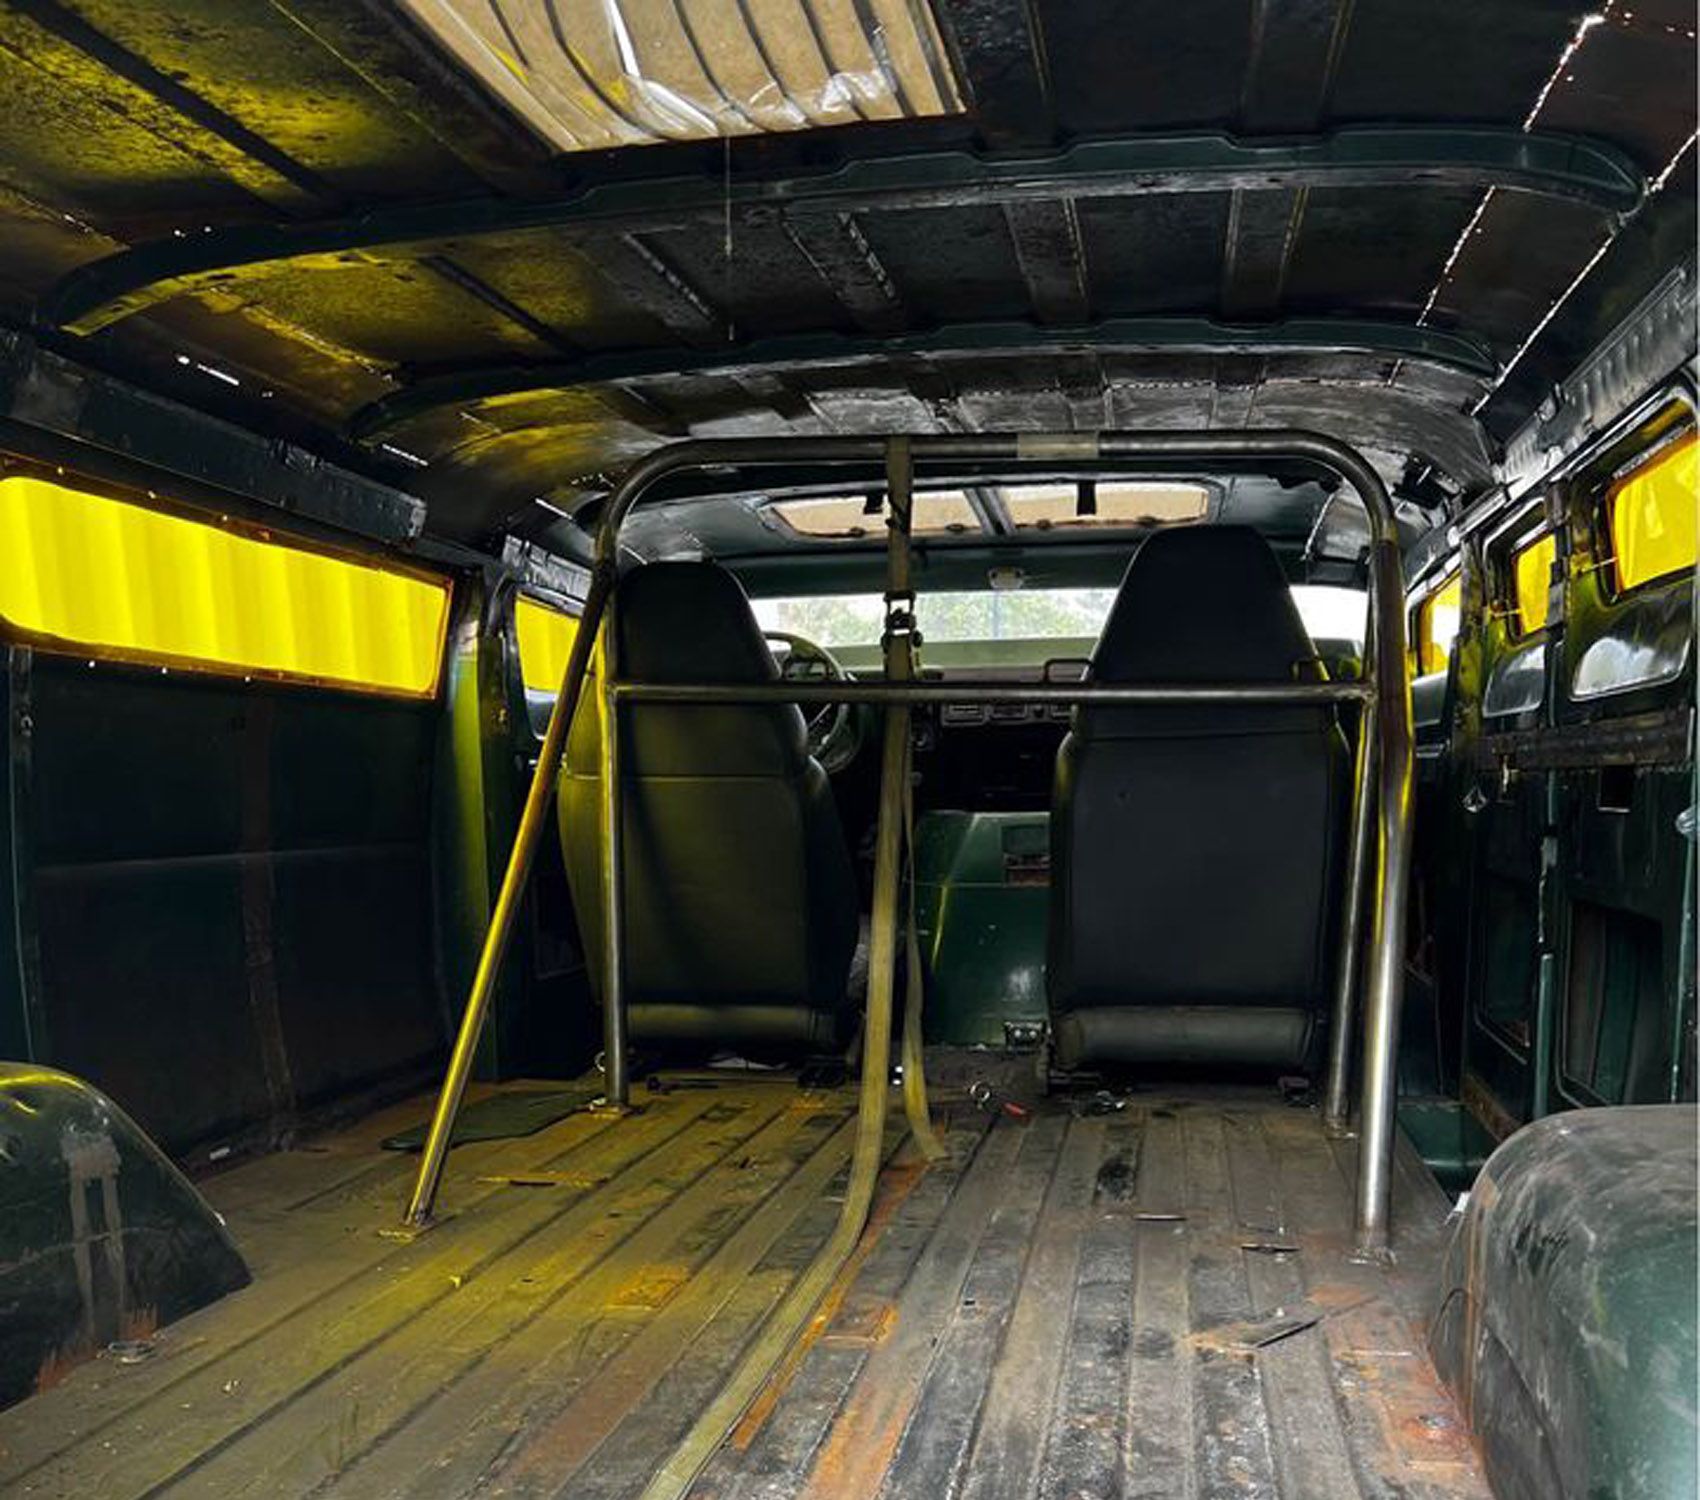 Insides Of The Chopped Top 1976 Dodge D-150 Van 